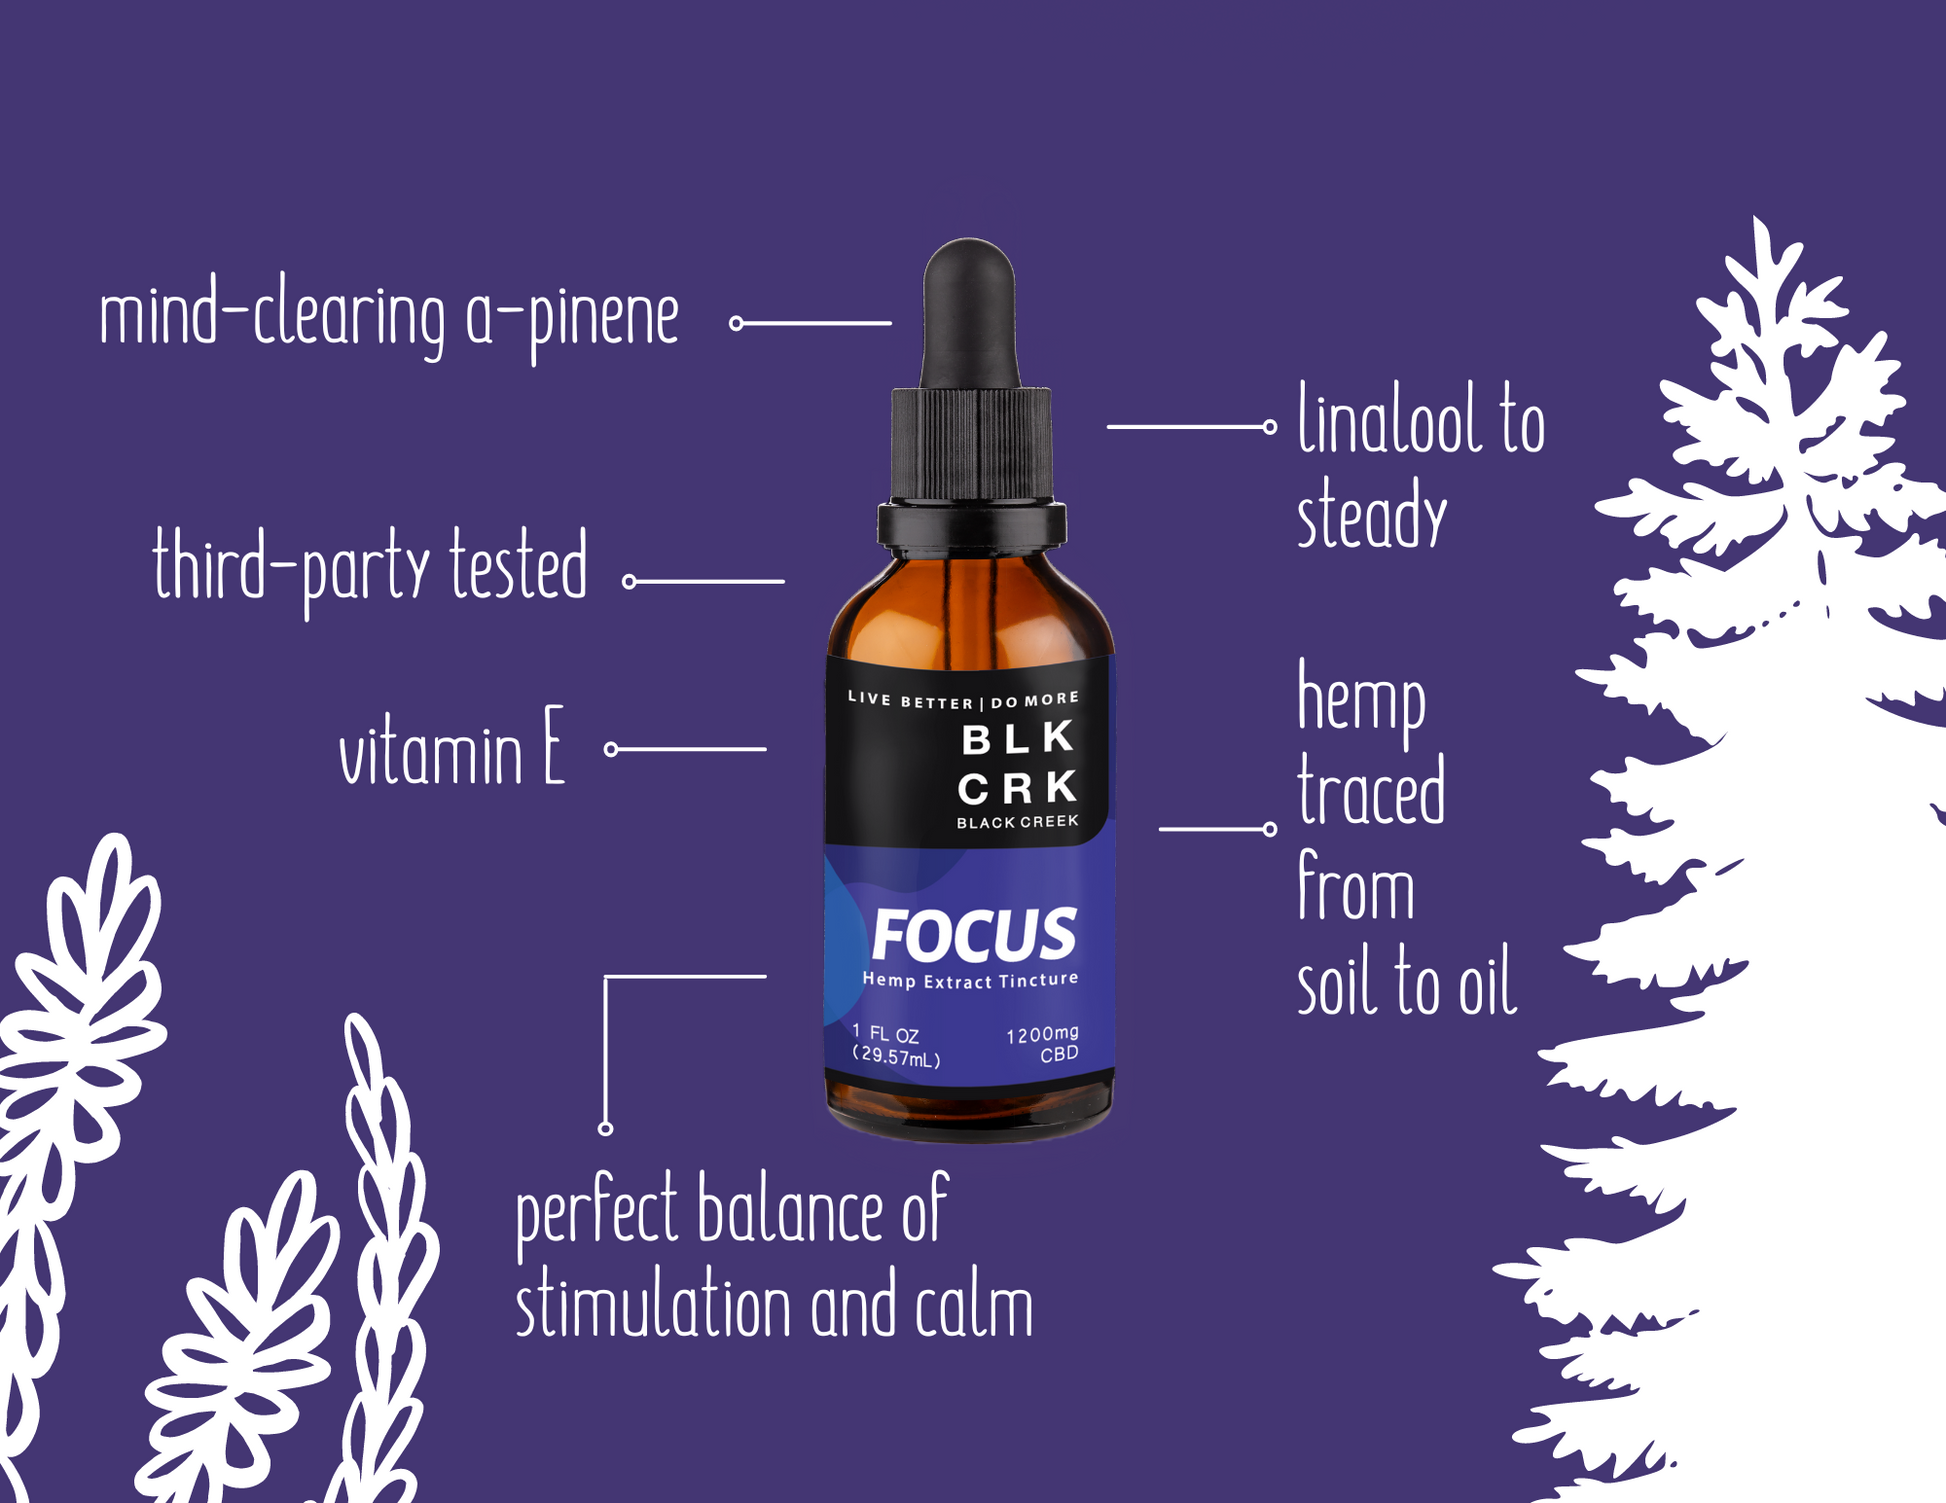 Black Creek CBD's focus tincture with a list of facts surrounding it. Mind-Clearing a-pinene, third party tested, vitamin E, perfect balance of stimulation and calm, linalool to steady, hemp traced from soil to oil. On a purple background with drawn lavender and pine tree